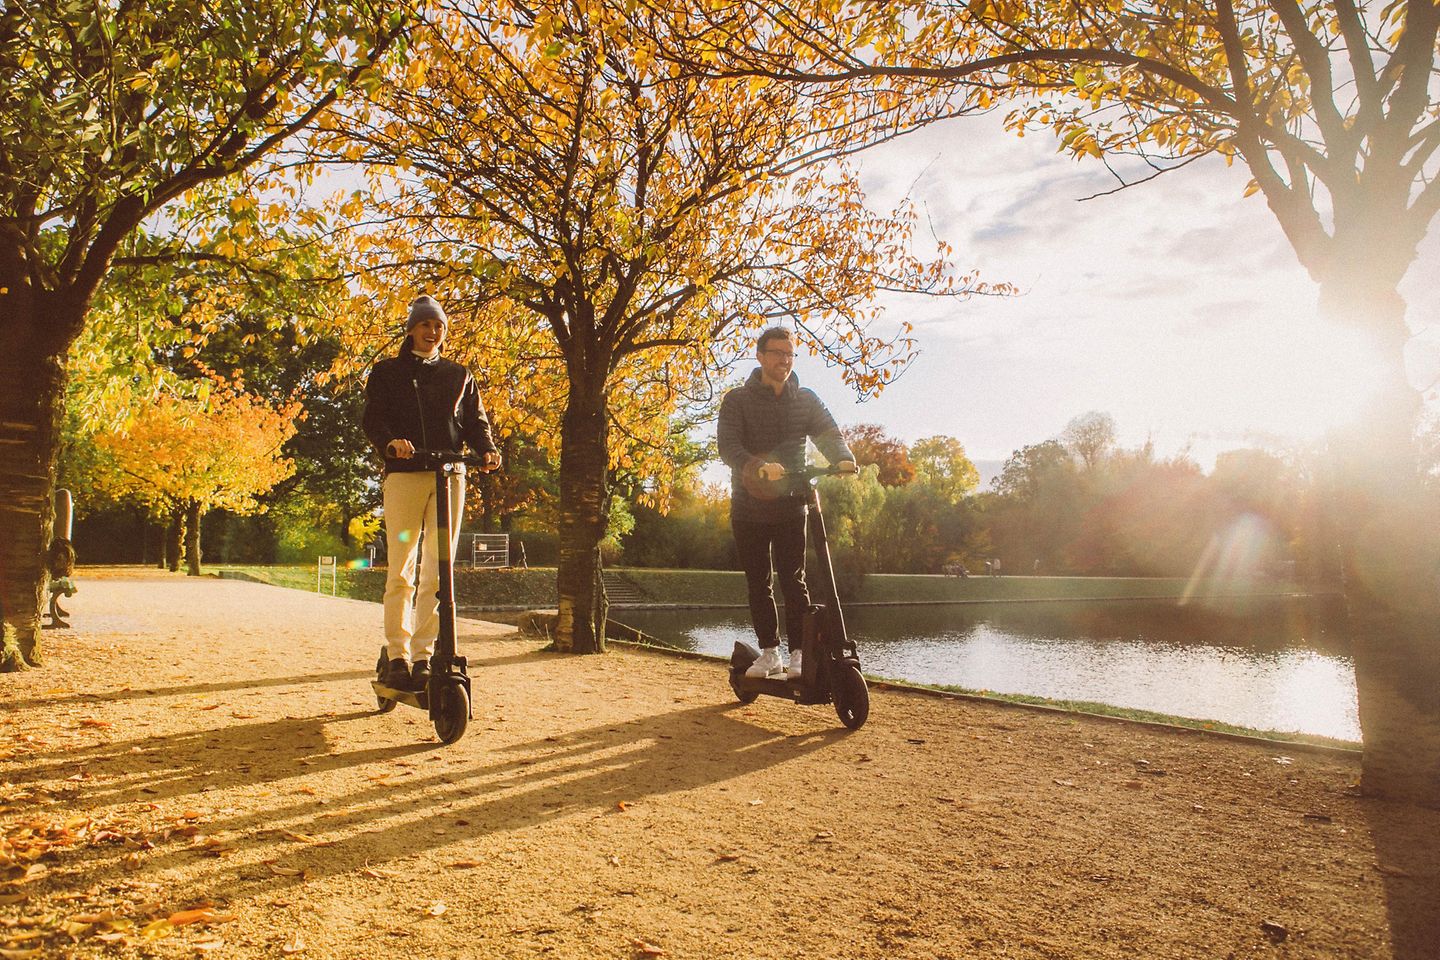 Two men on e-scooters ride in an autumnal park